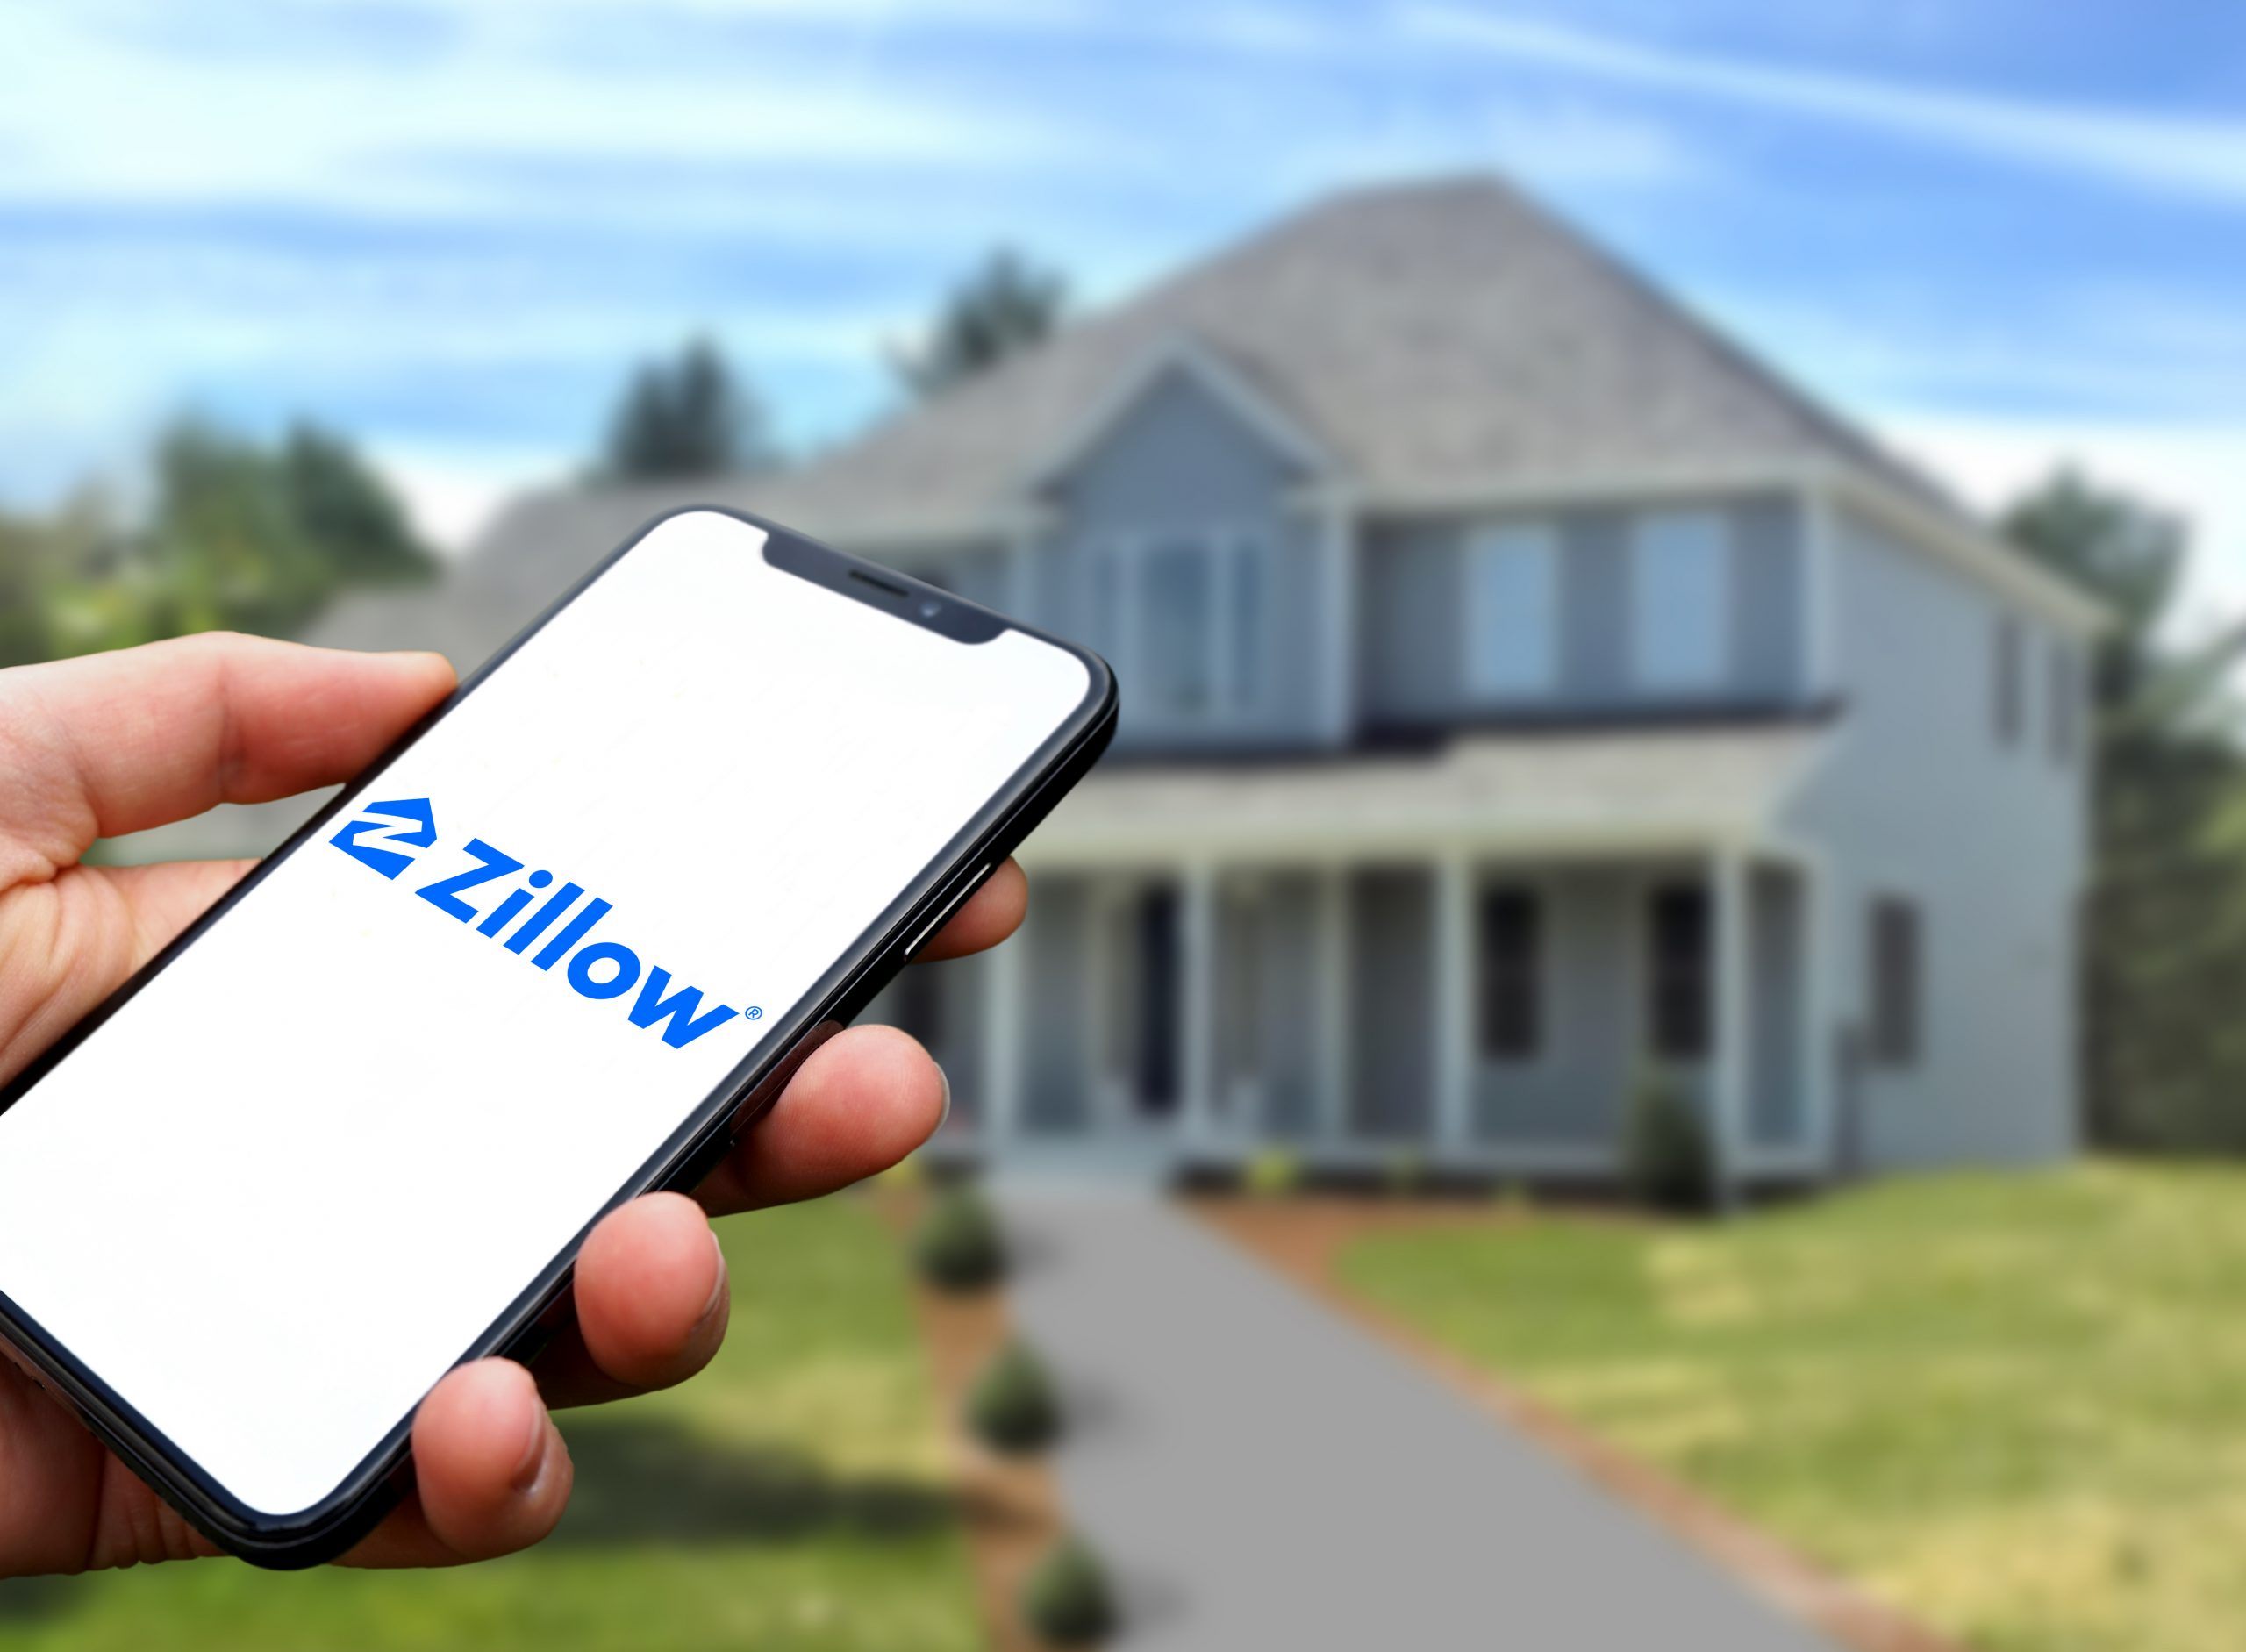 Zillow logo is displayed on a smartphone in the hand of a person